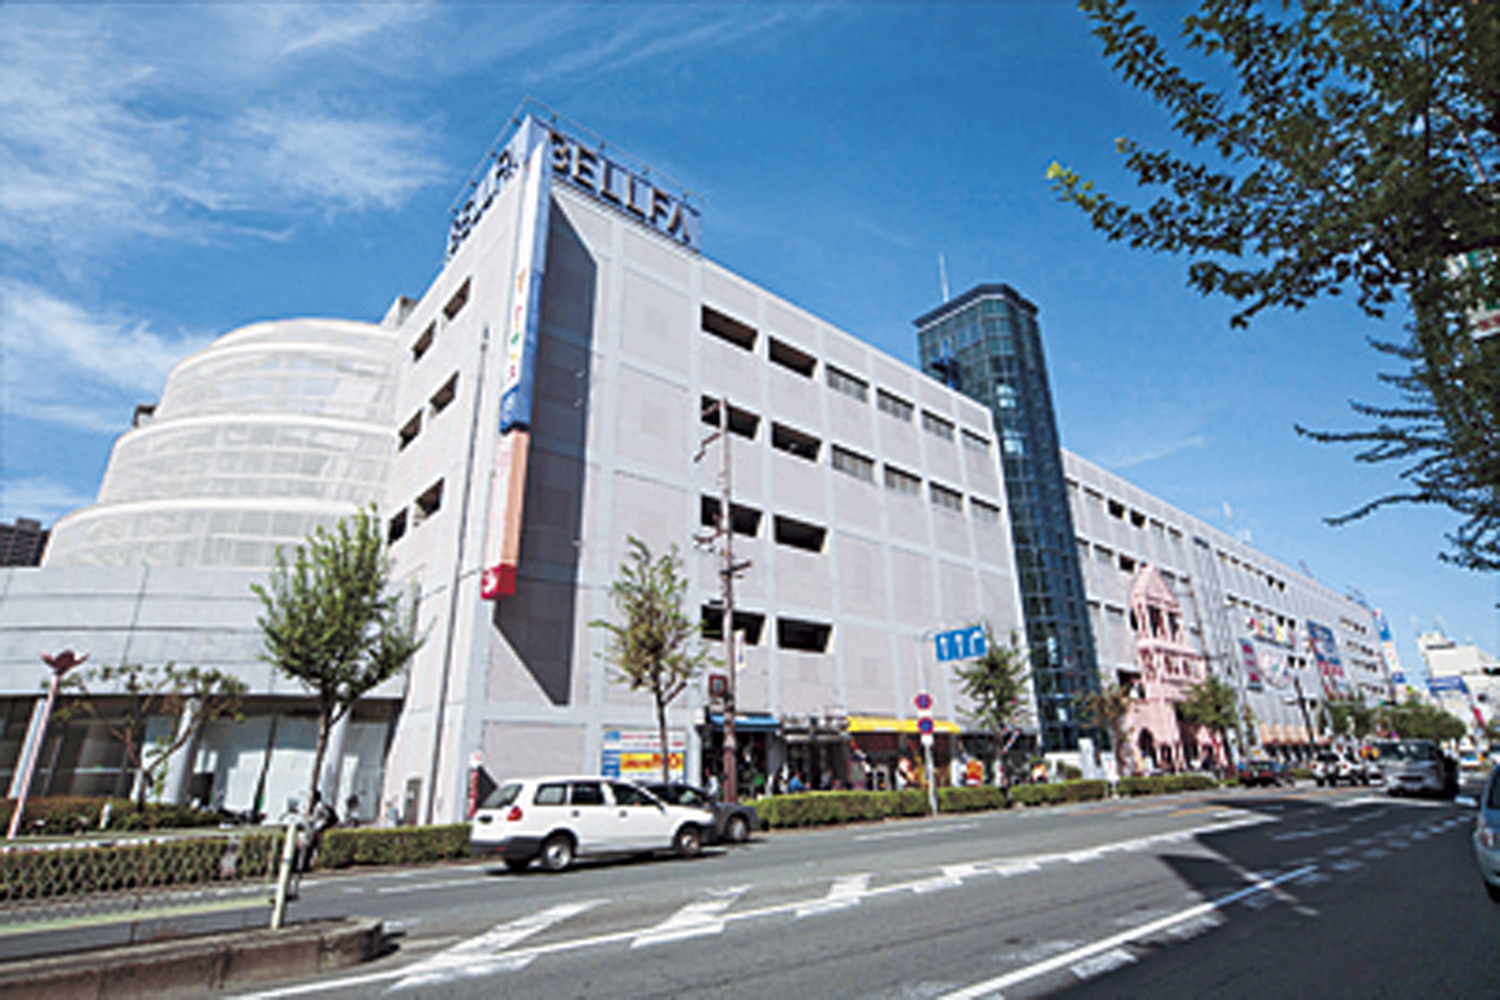 Uniqlo and EDION, Restaurants, etc., Large-scale commercial facilities Berufa Miyakojima shopping center with a variety of shops are aligned (about 390m)